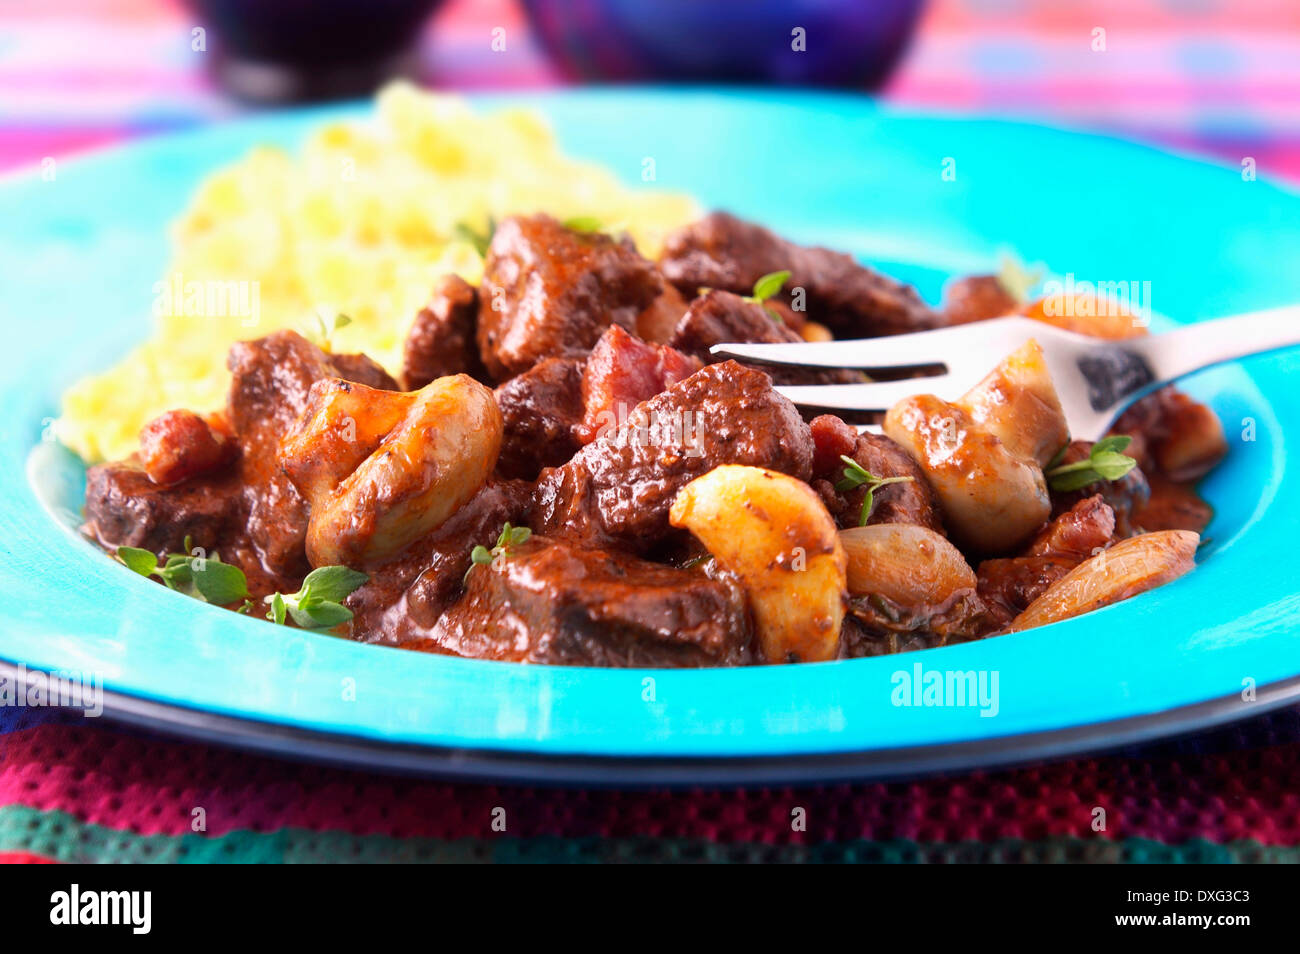 Plate Of Homemade Beef Bourginion Stock Photo